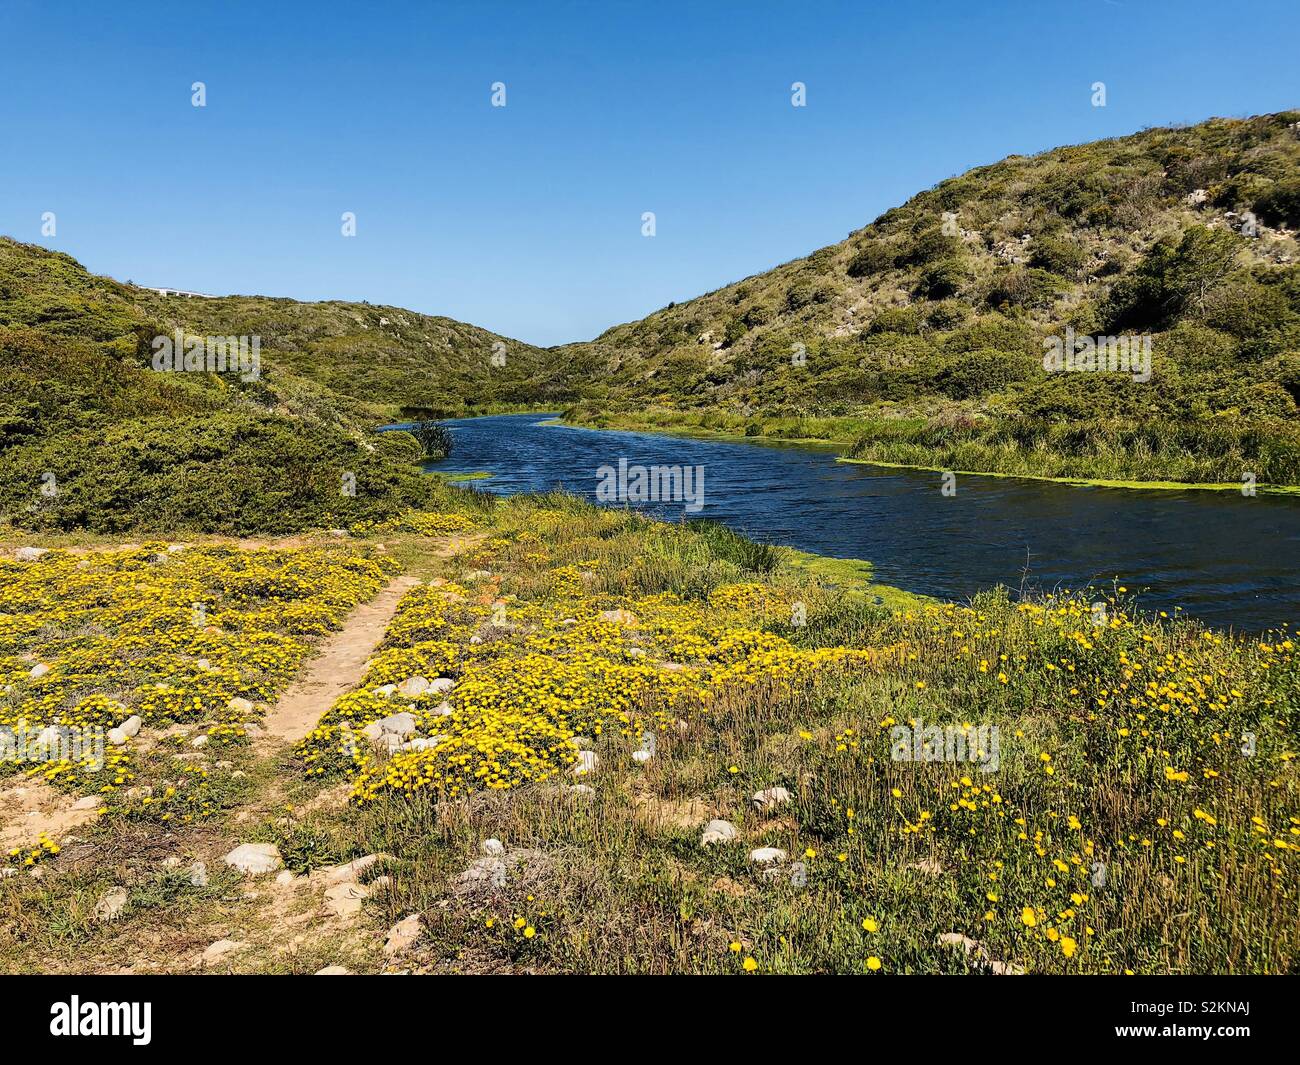 Yellow flowers, pallenis maritima by a river on the Portuguese coast Stock Photo